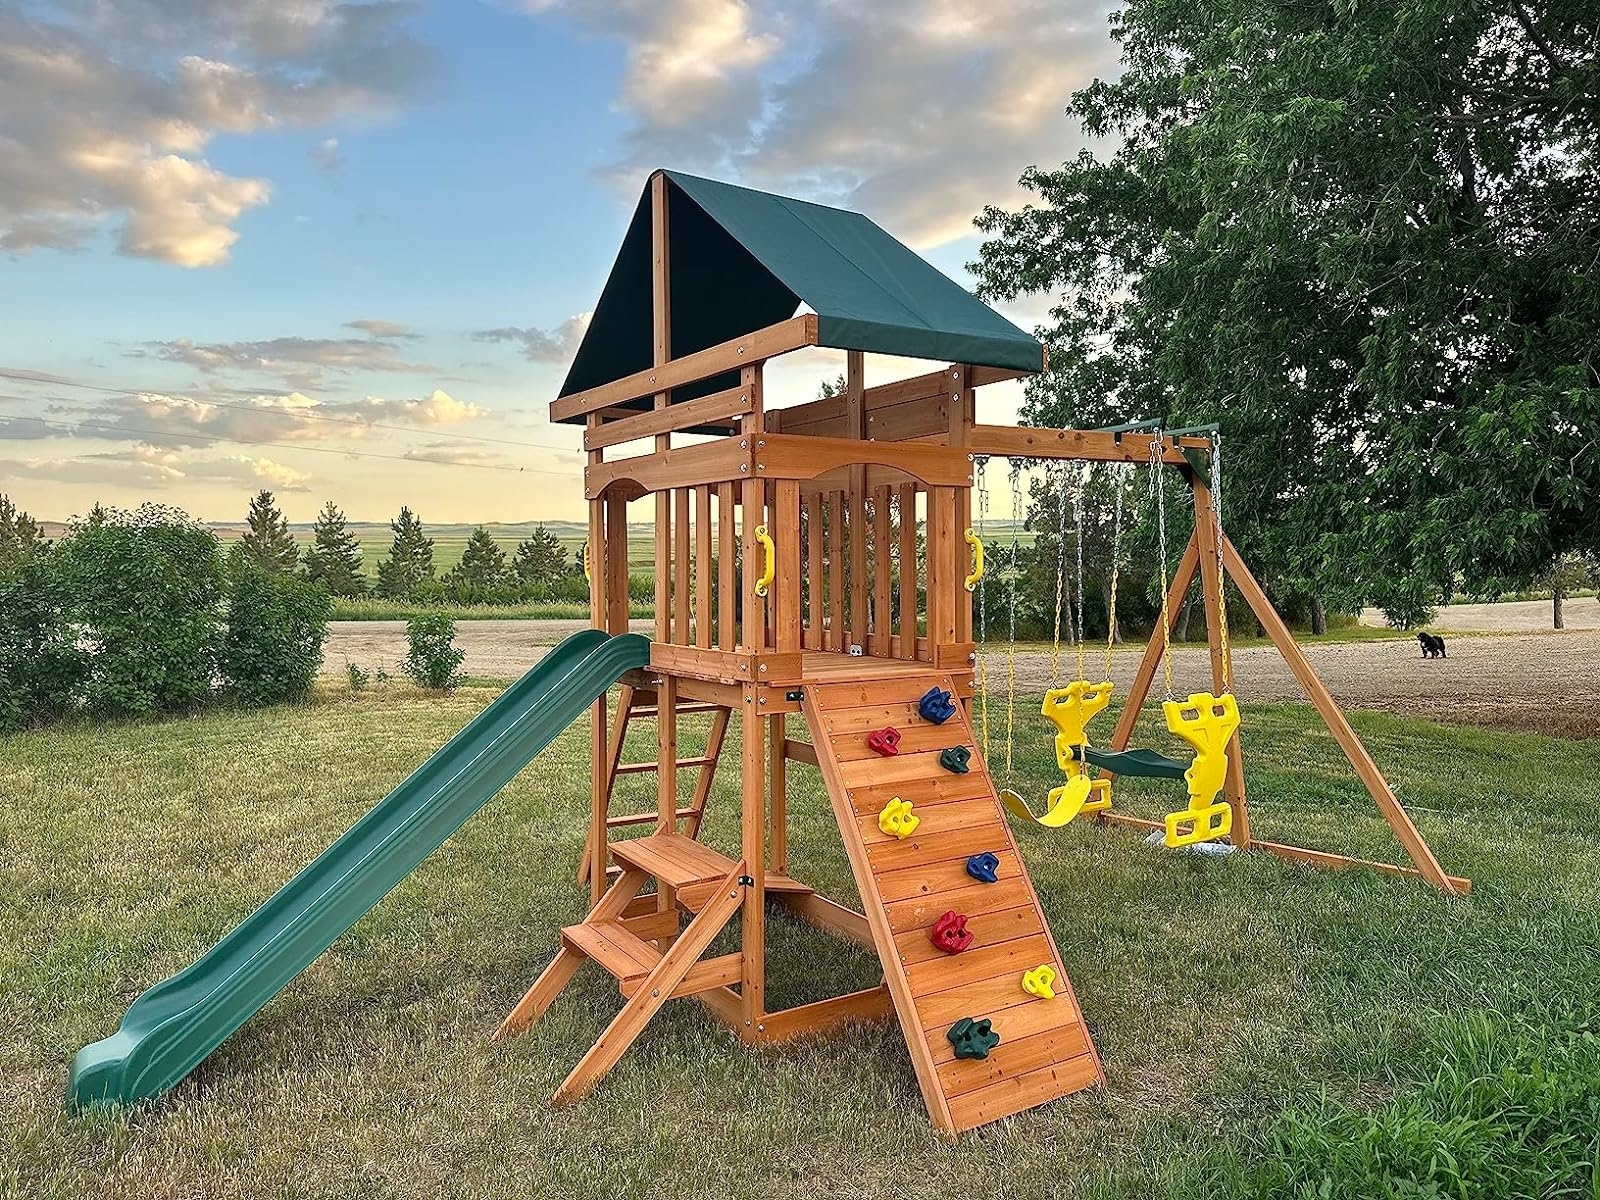 Wooden playset with slide, swings, and climbing wall in an outdoor setting. Suitable for children&#x27;s backyard play